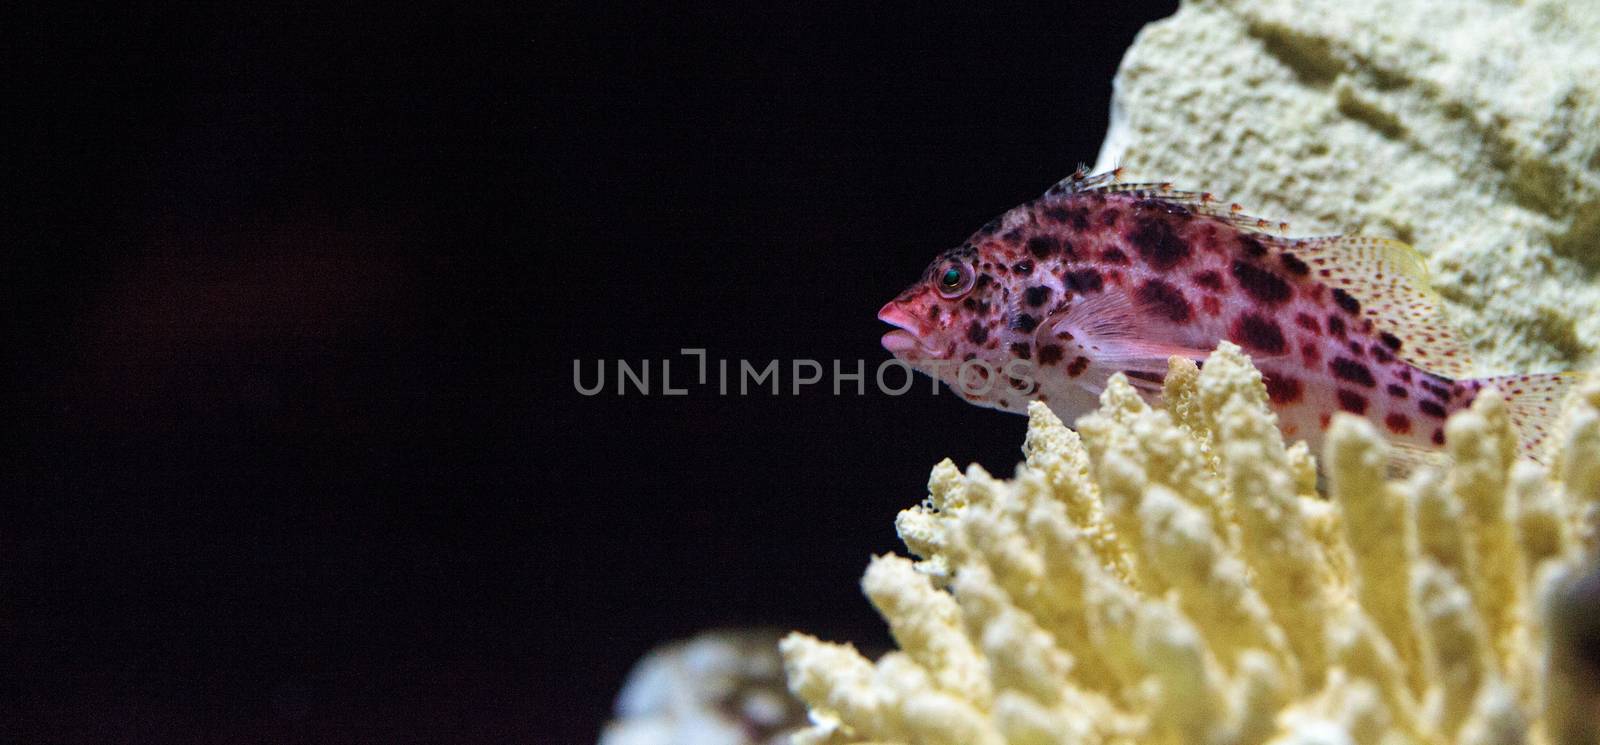 Spotted hawkfish Cirrhitichthys aprinus perches on coral and sand in a reef